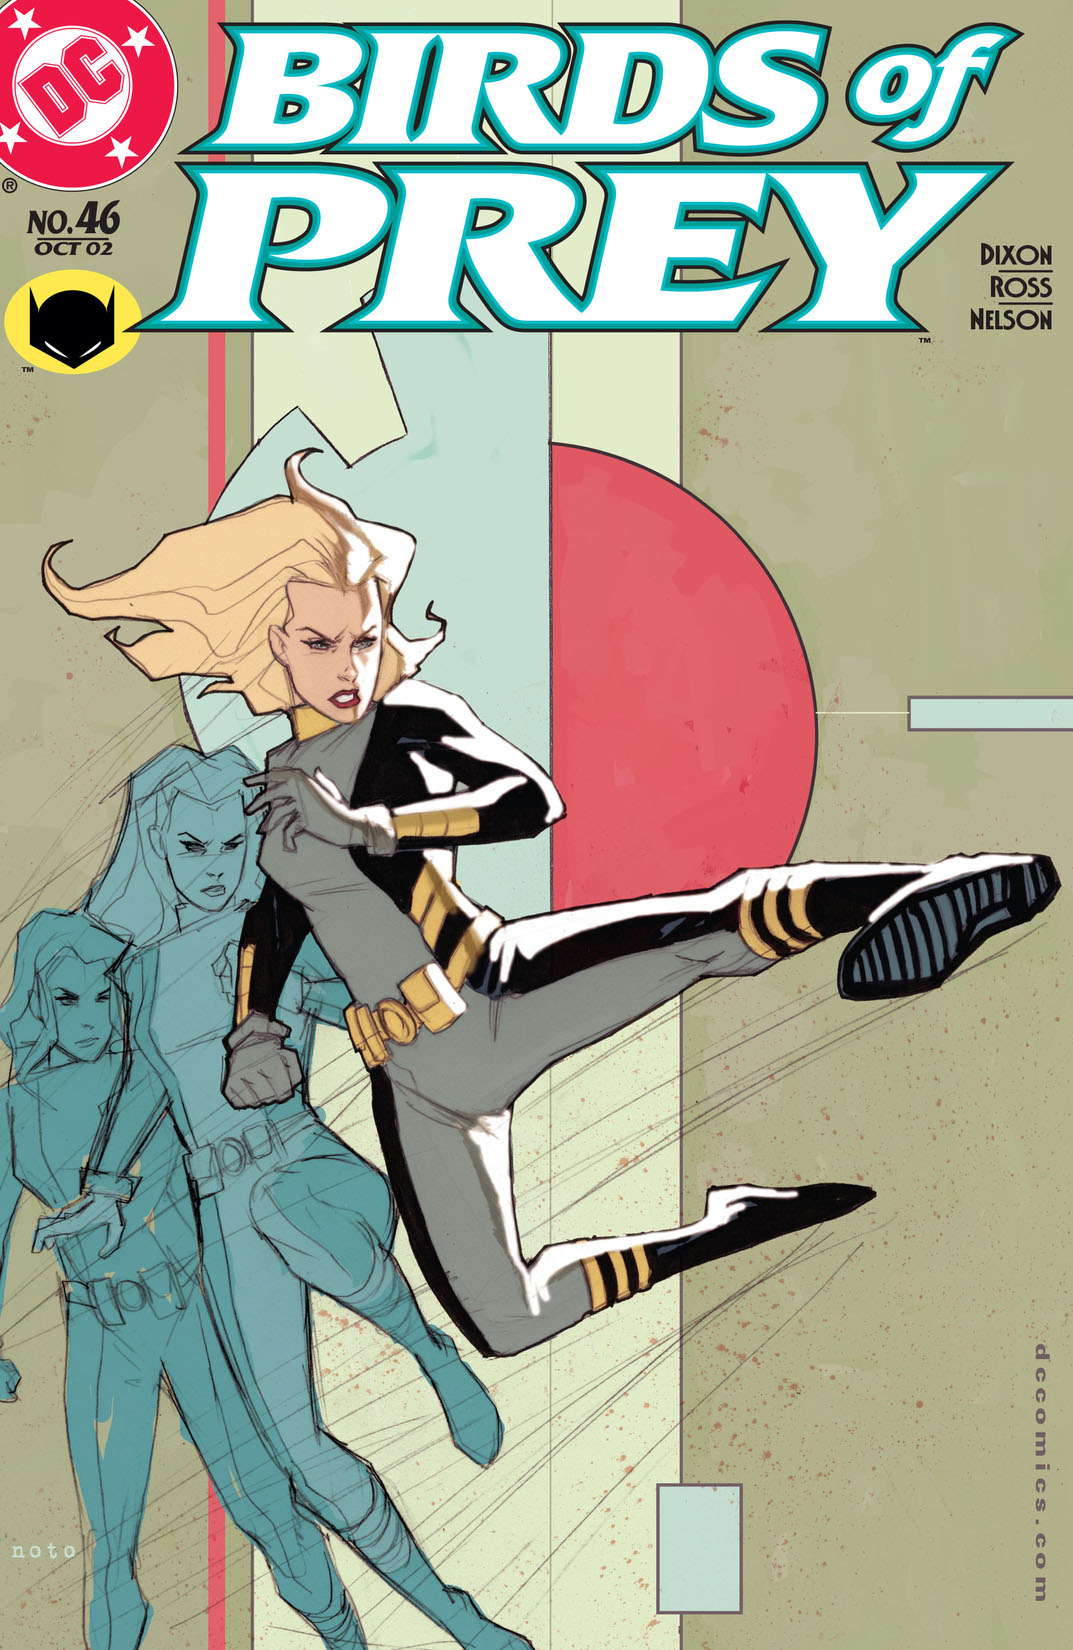 Birds of Prey (1998-) #46 preview images